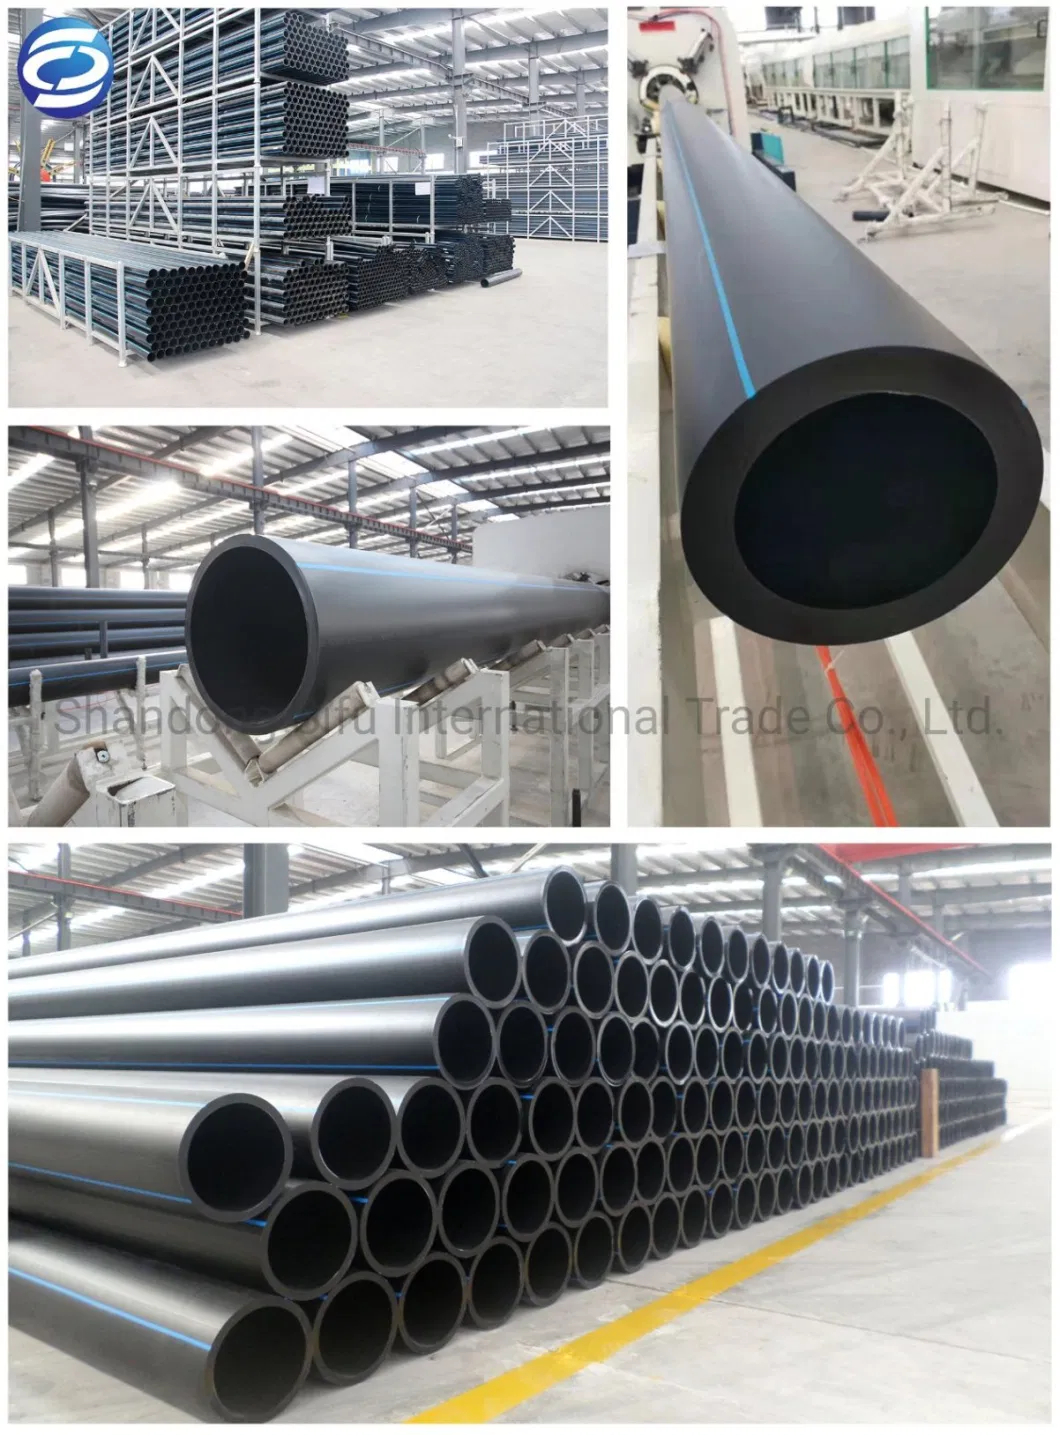 Wholsale Price Durable PE100 Water Pipe HDPE Pipe for Water Gas Sewer Mains Slurry Irrigation HDPE